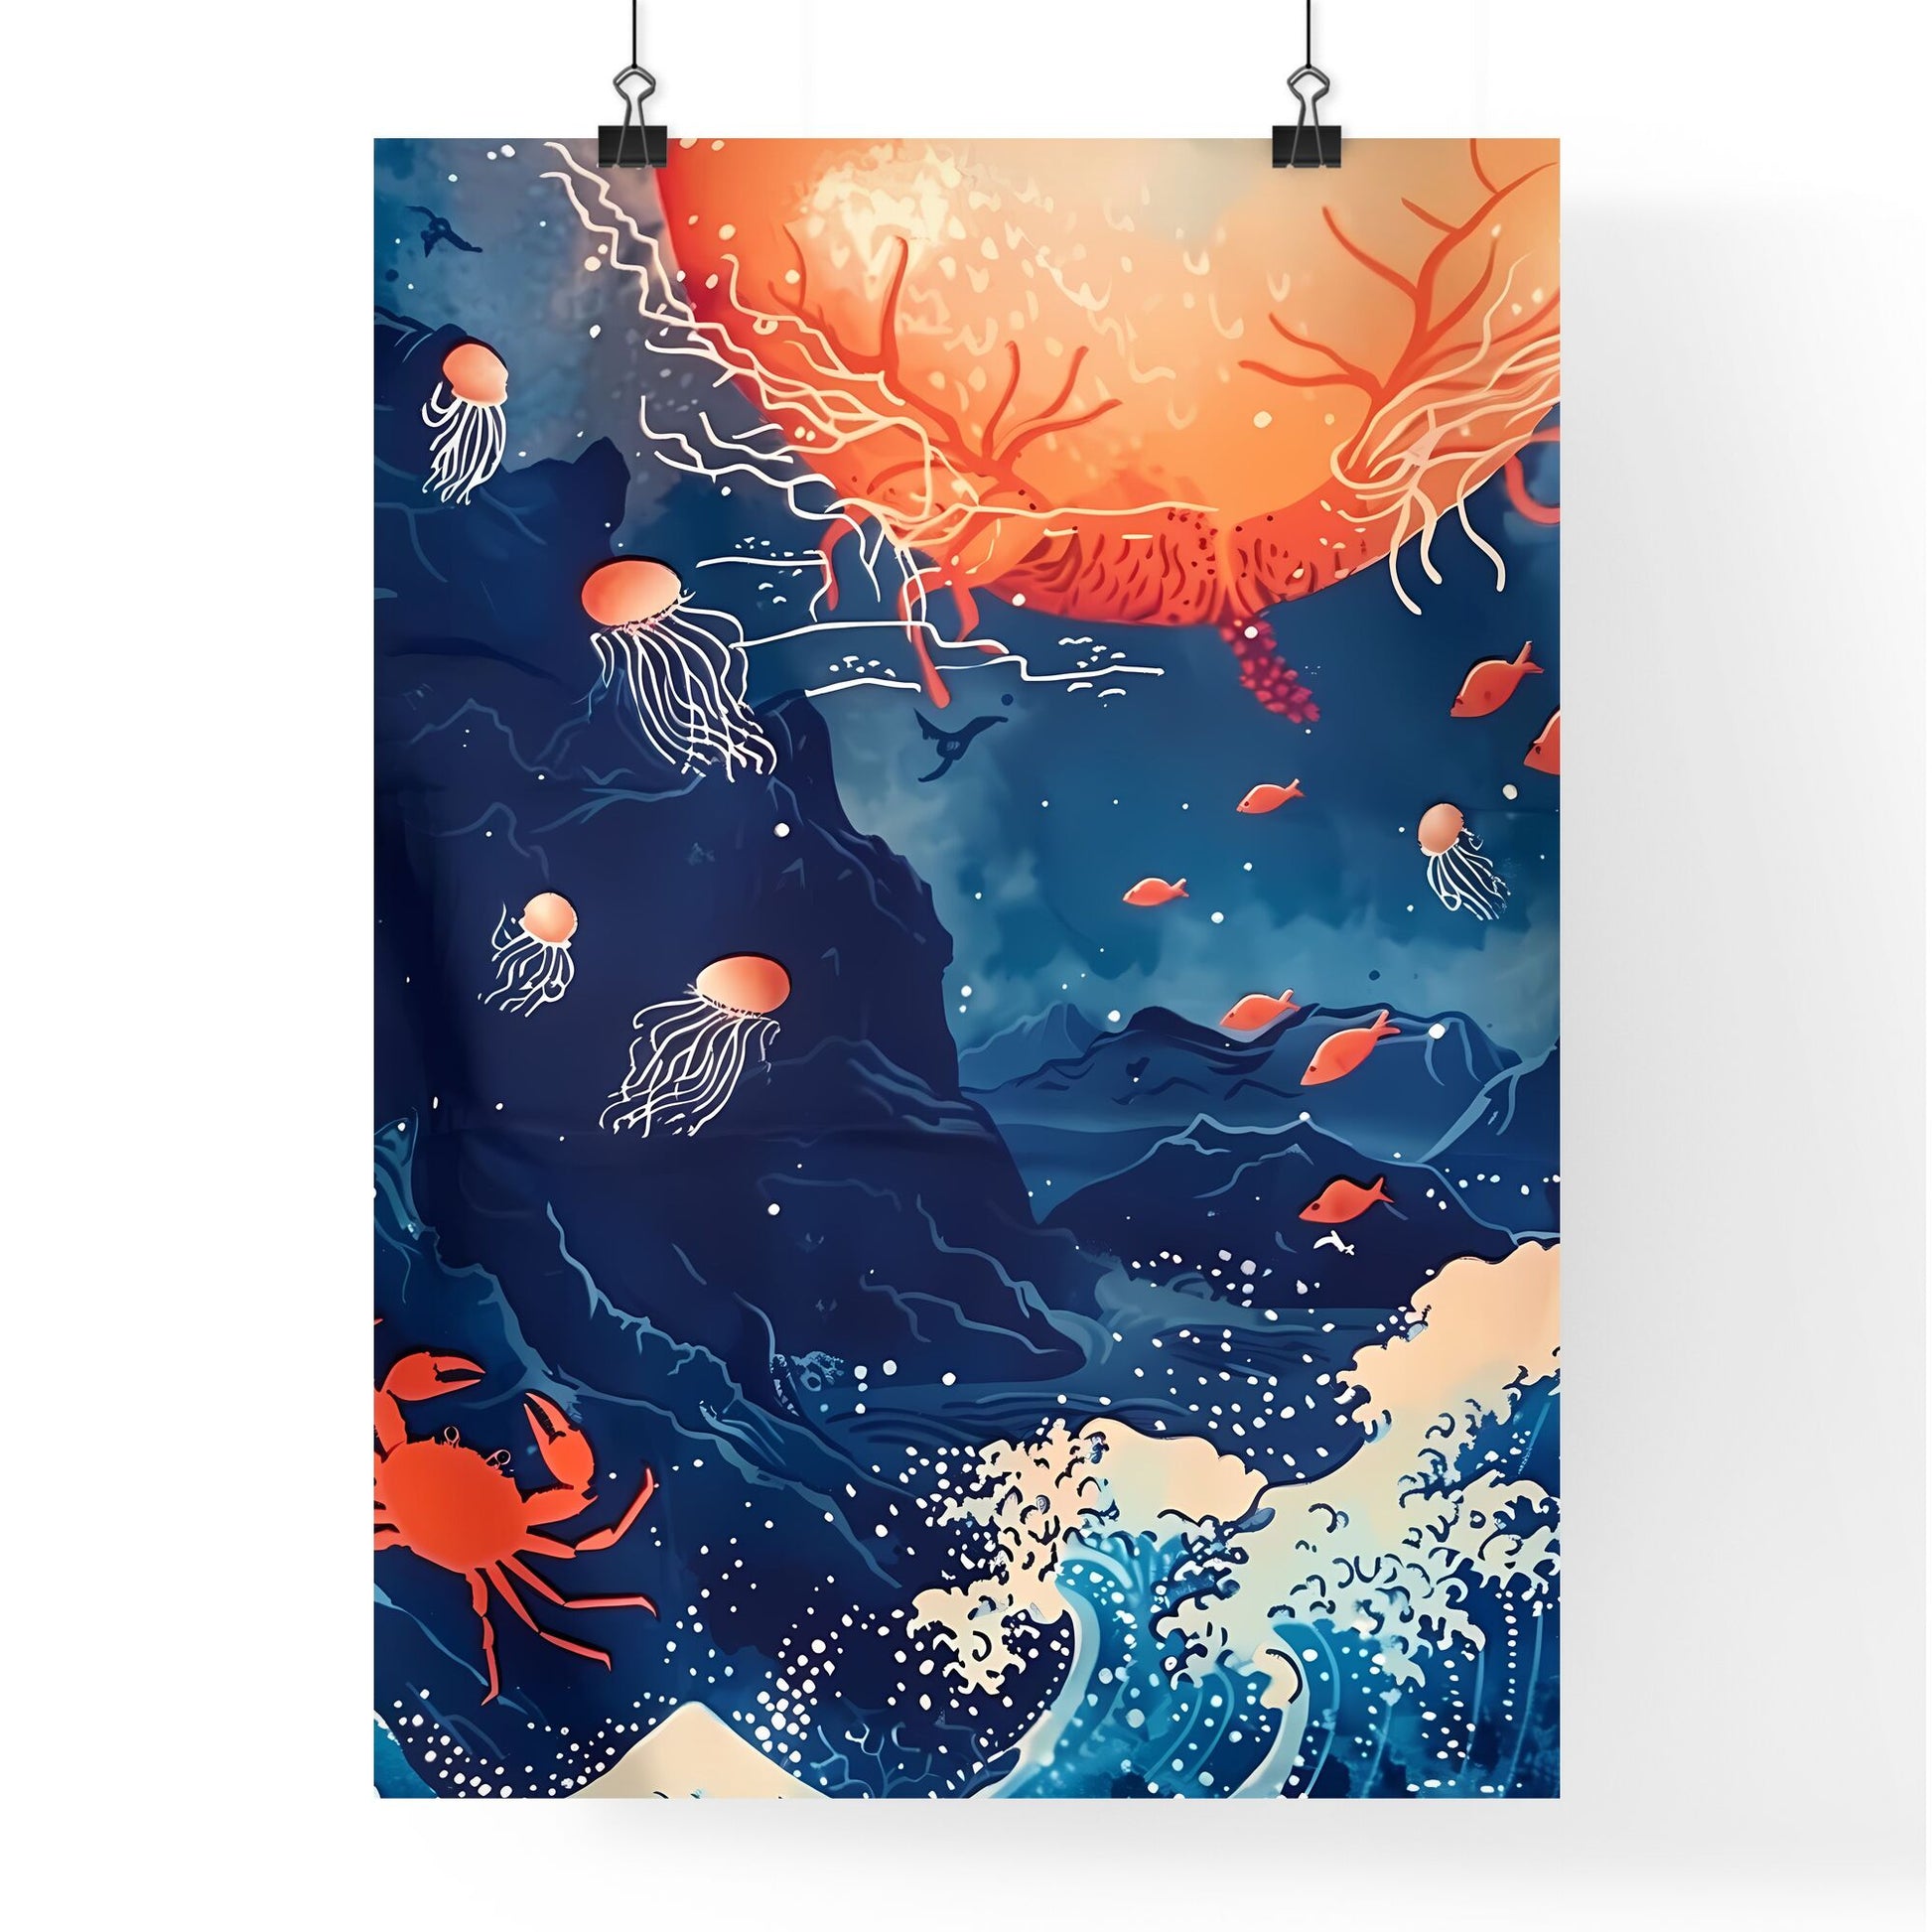 Vibrant Blue Seascape Painting with Dancing Fish and Whirling Jellyfish Default Title